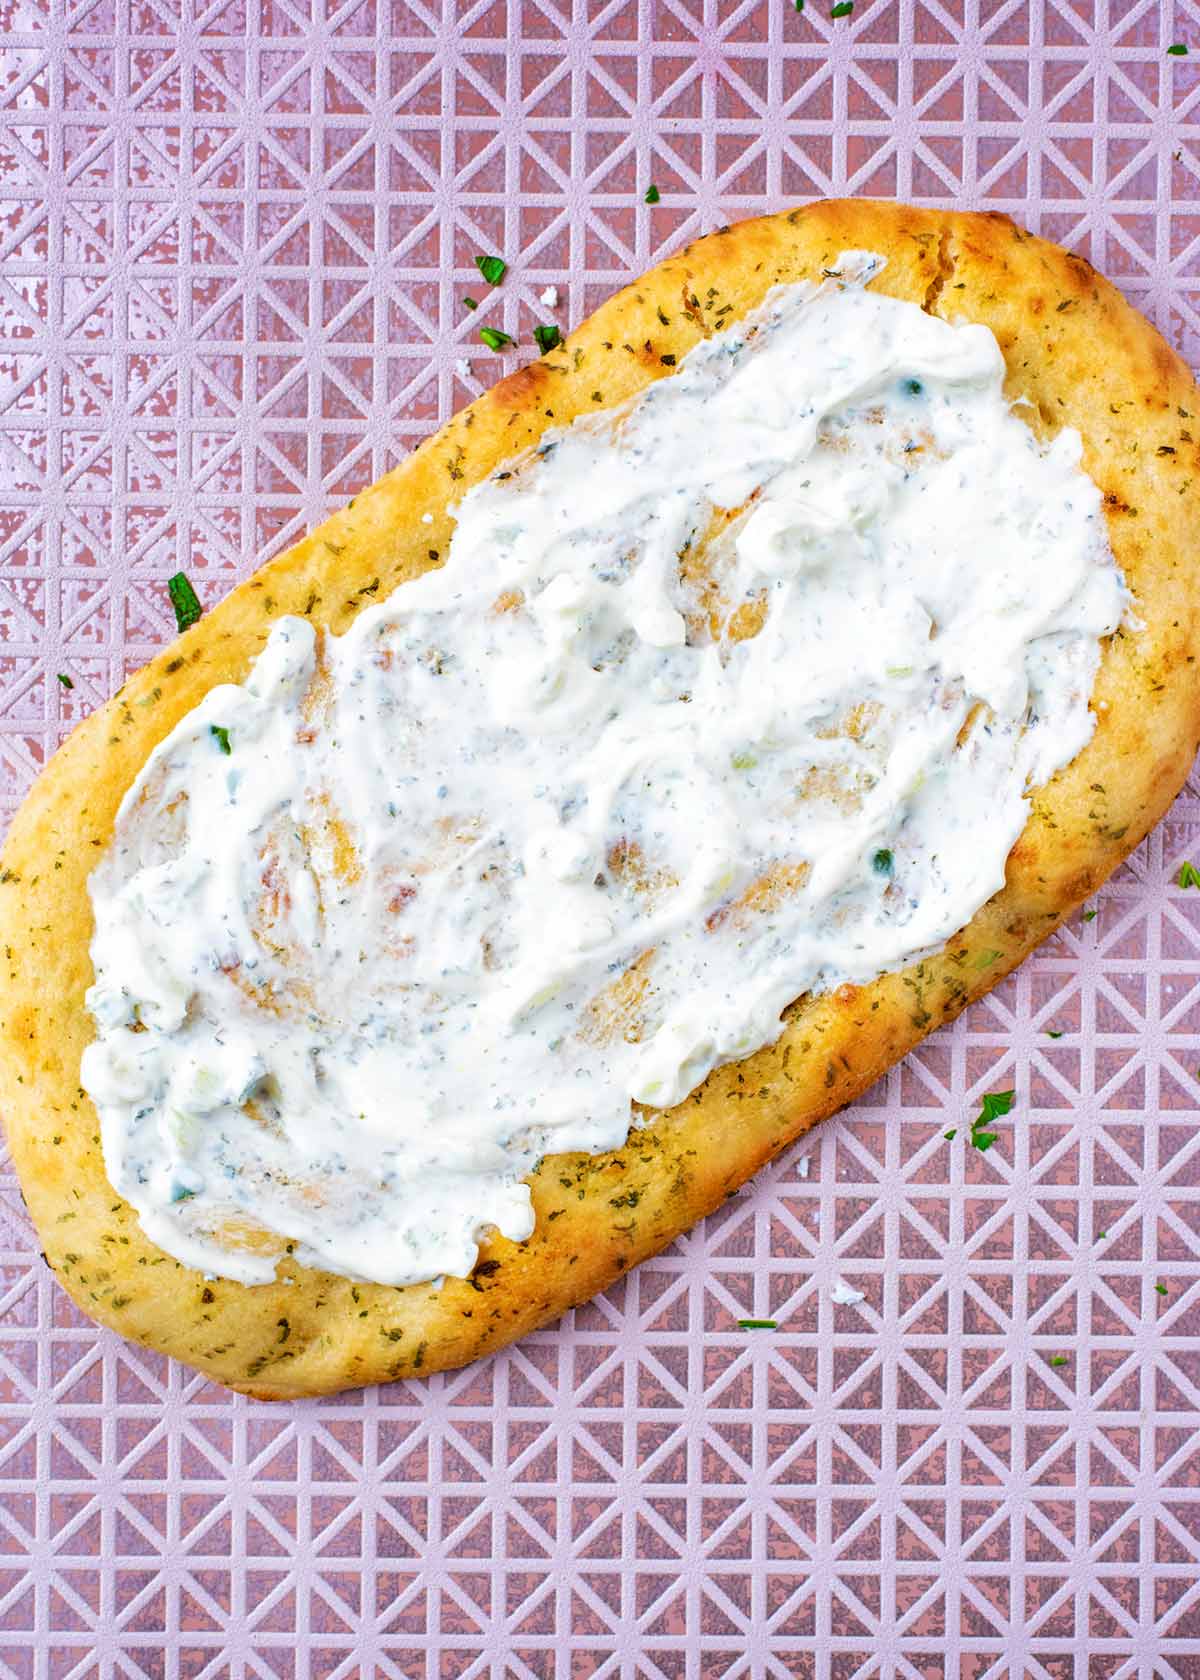 A flatbread with tzatziki spread over it.